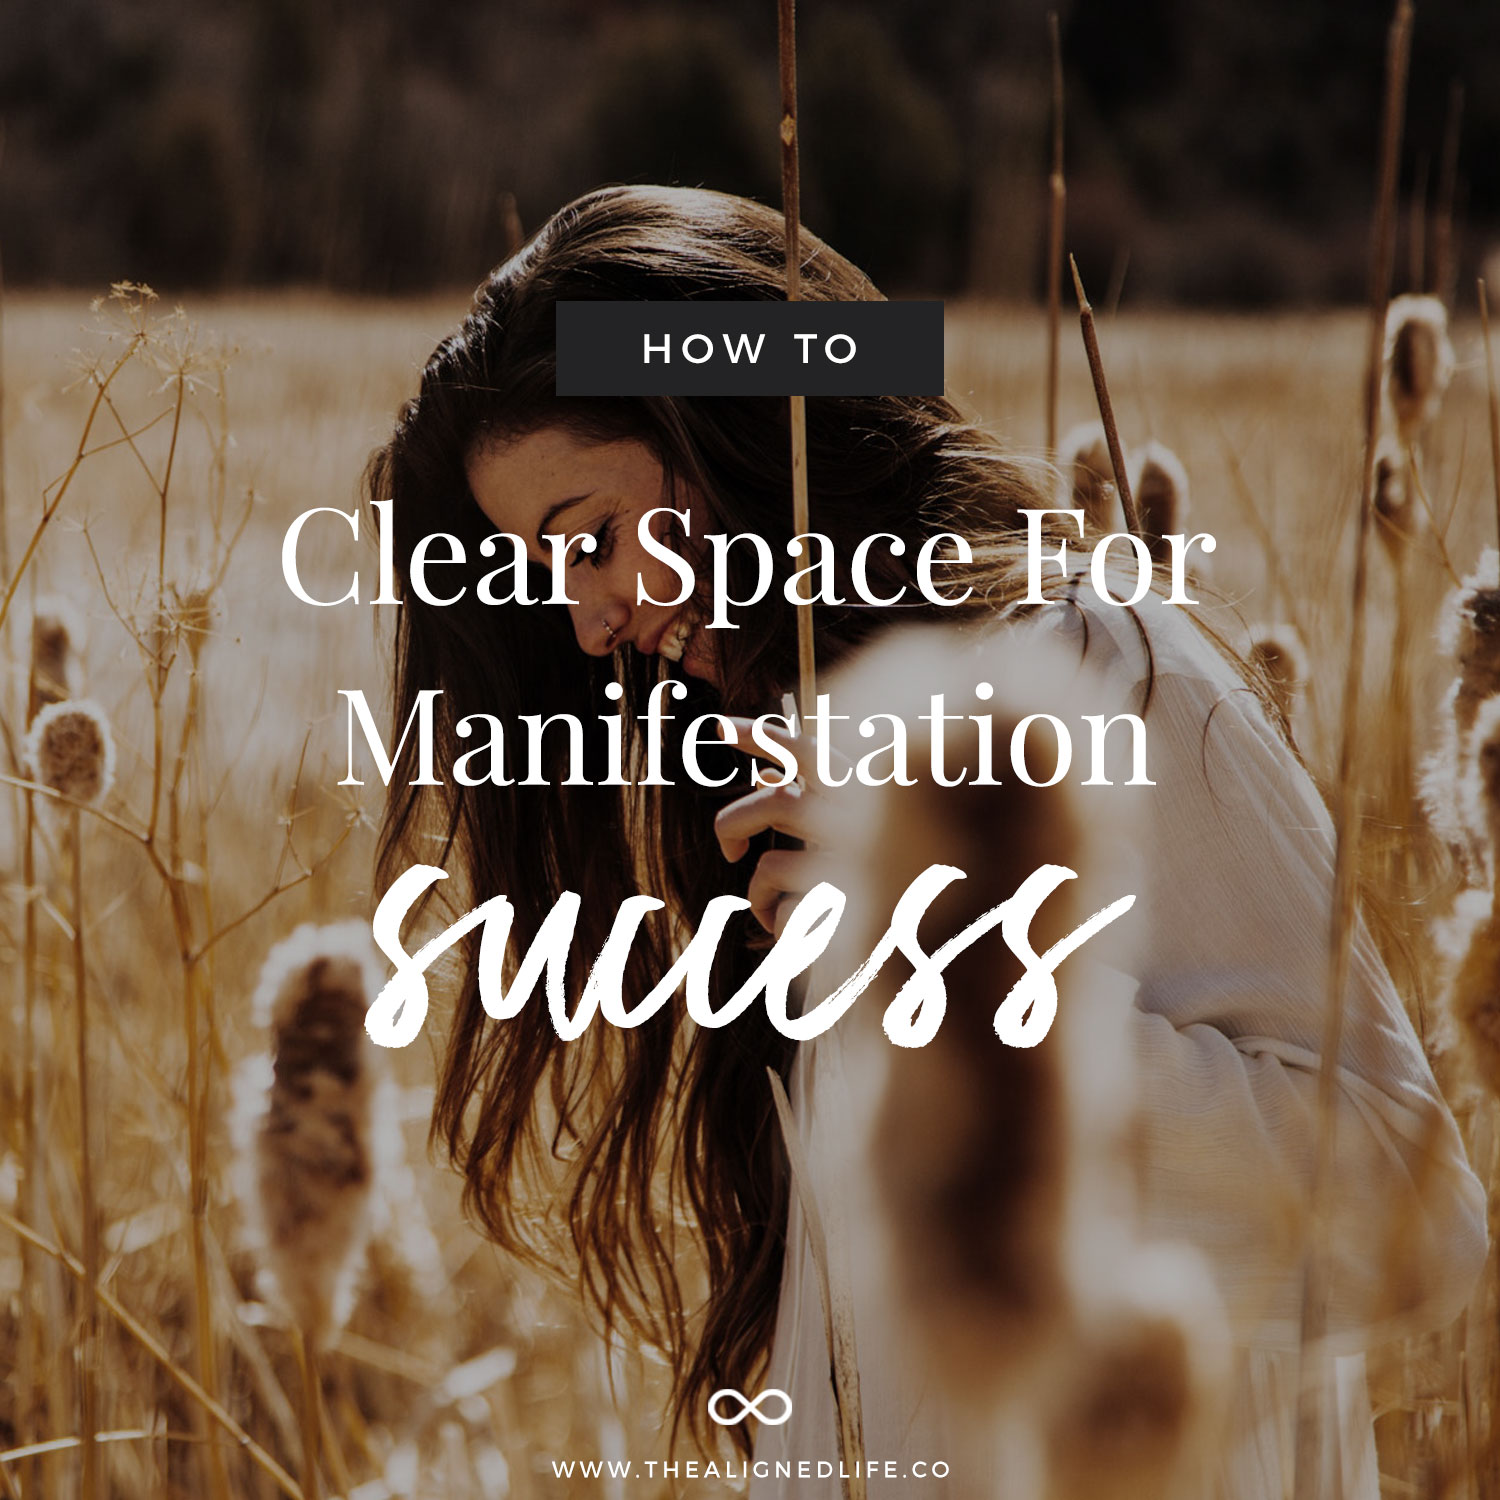 How To Clear Space For Manifestation Success